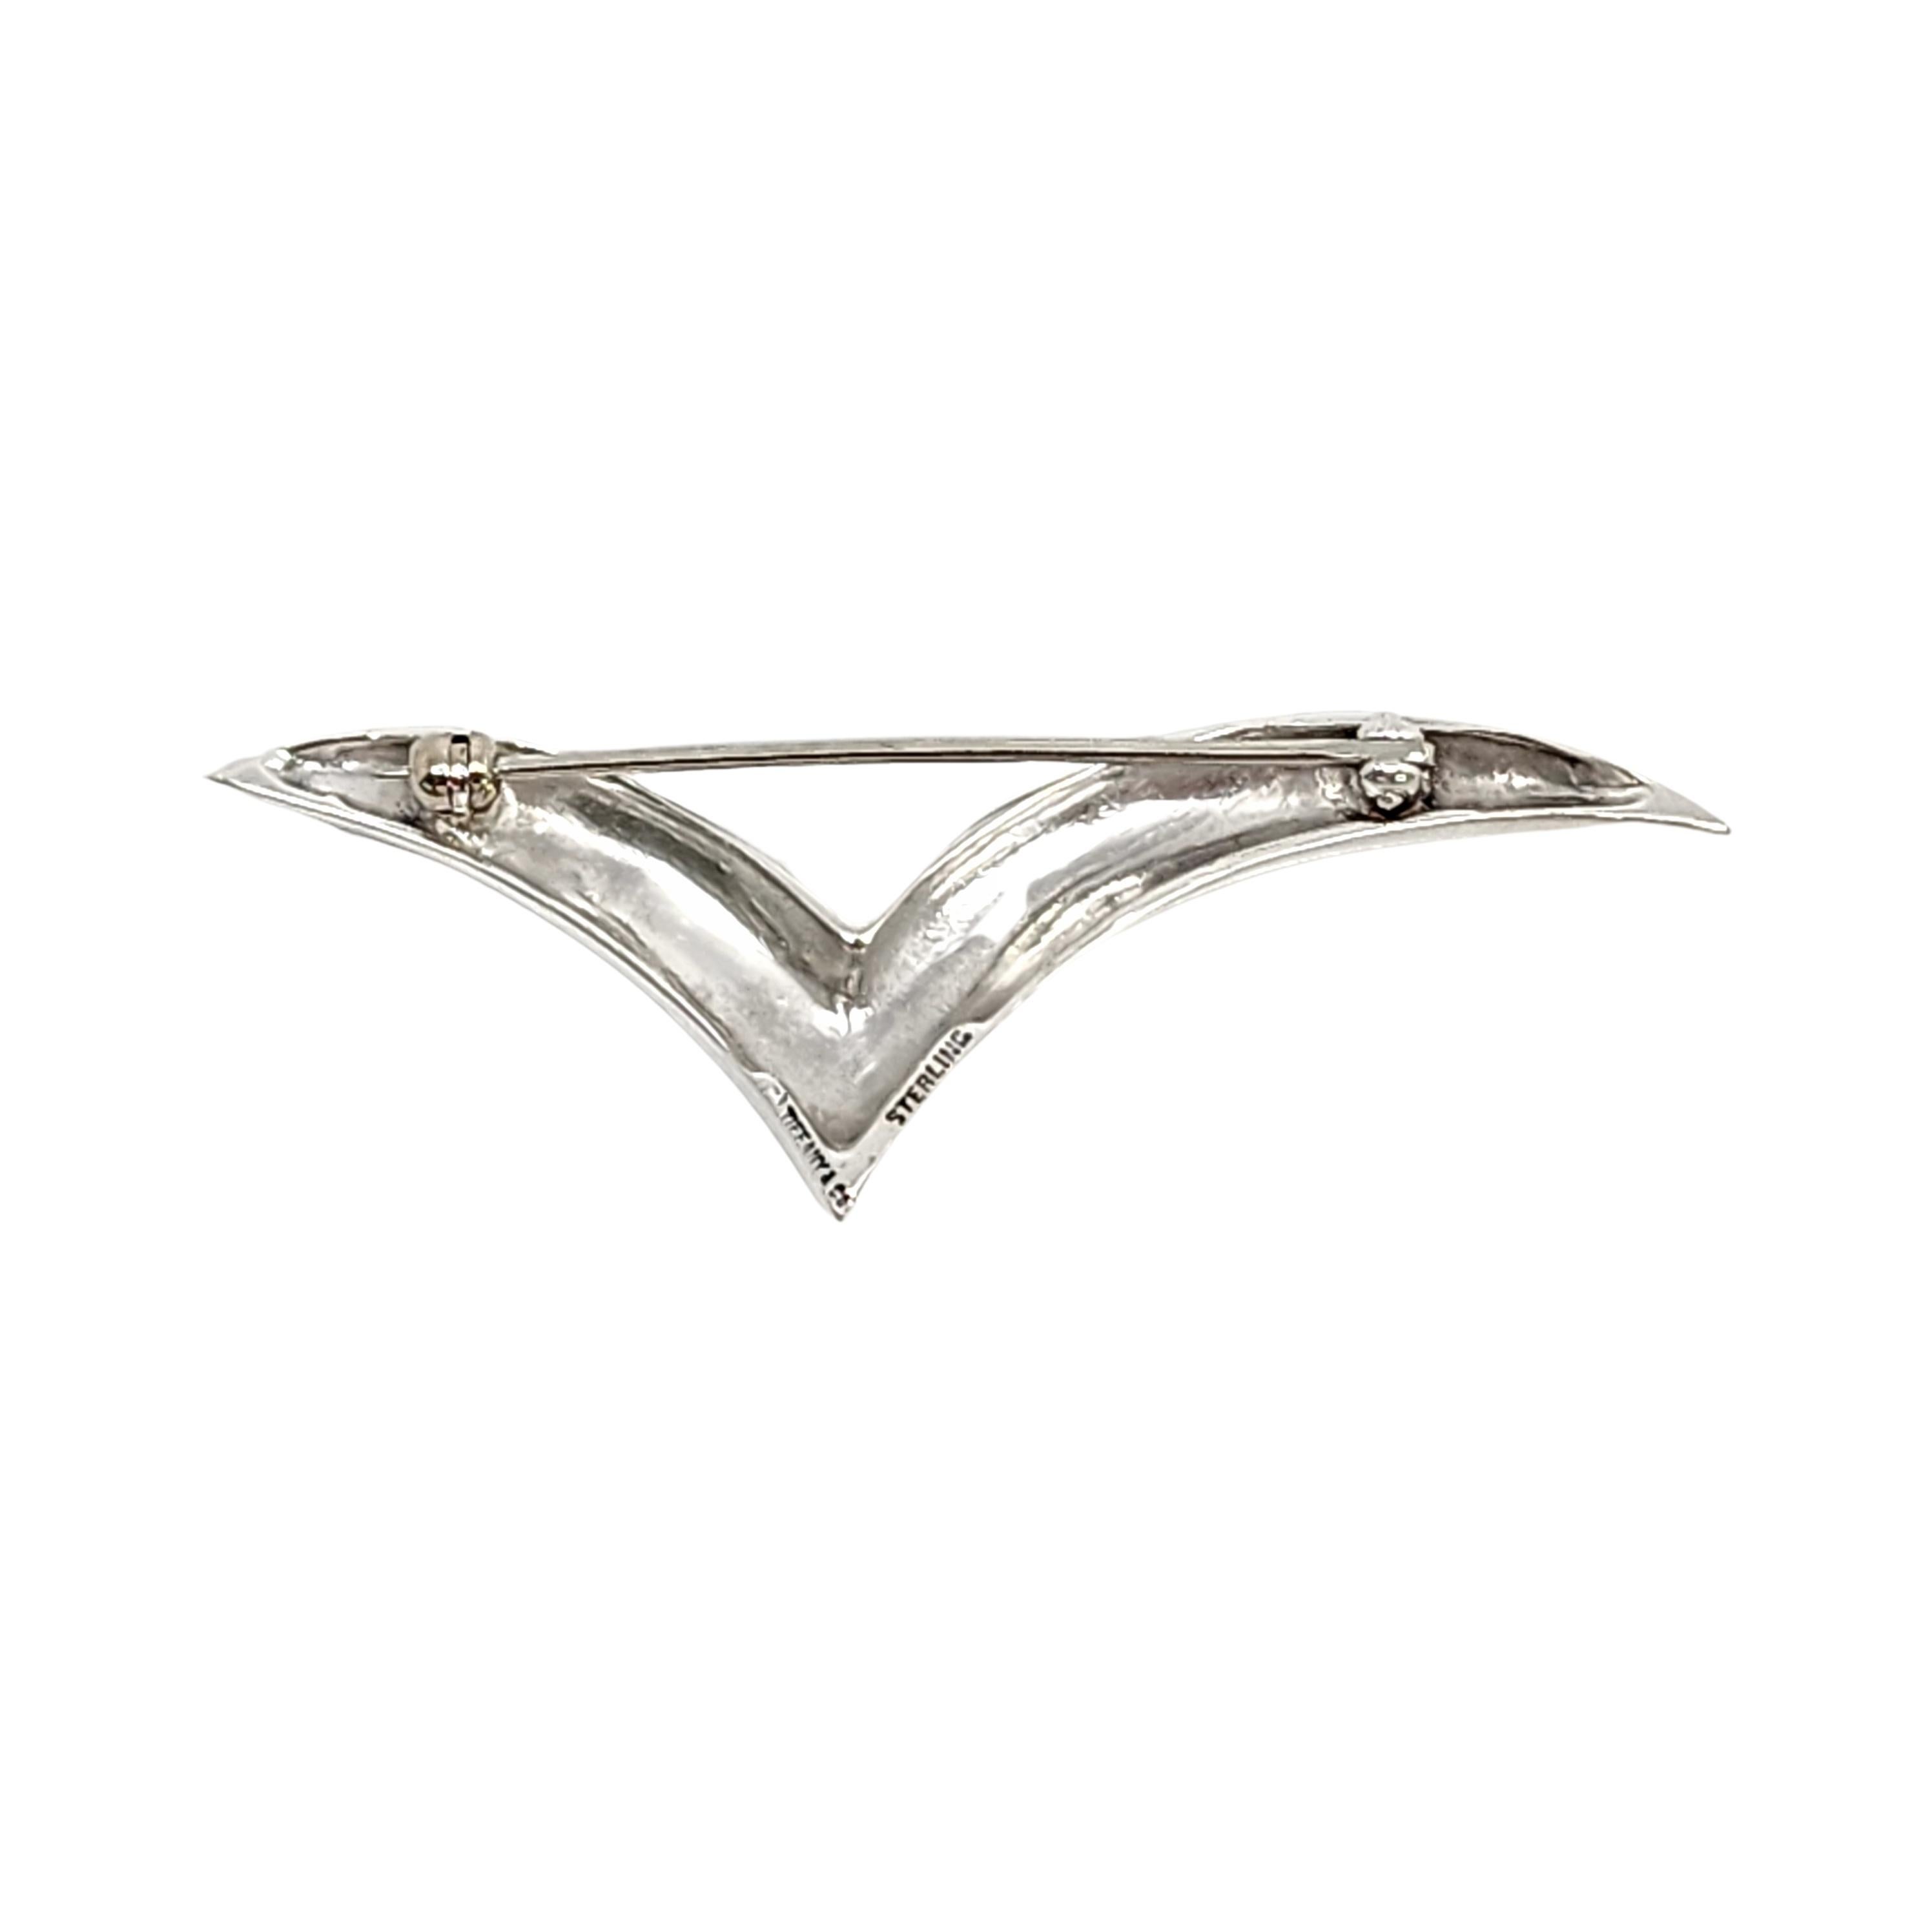 Tiffany & Co sterling silver seagull pin/brooch, circa 1980s.

Tiffany vintage flying seagull design pin in the larger size. Does not include Tiffany & Co box or pouch.

Measures approx 2